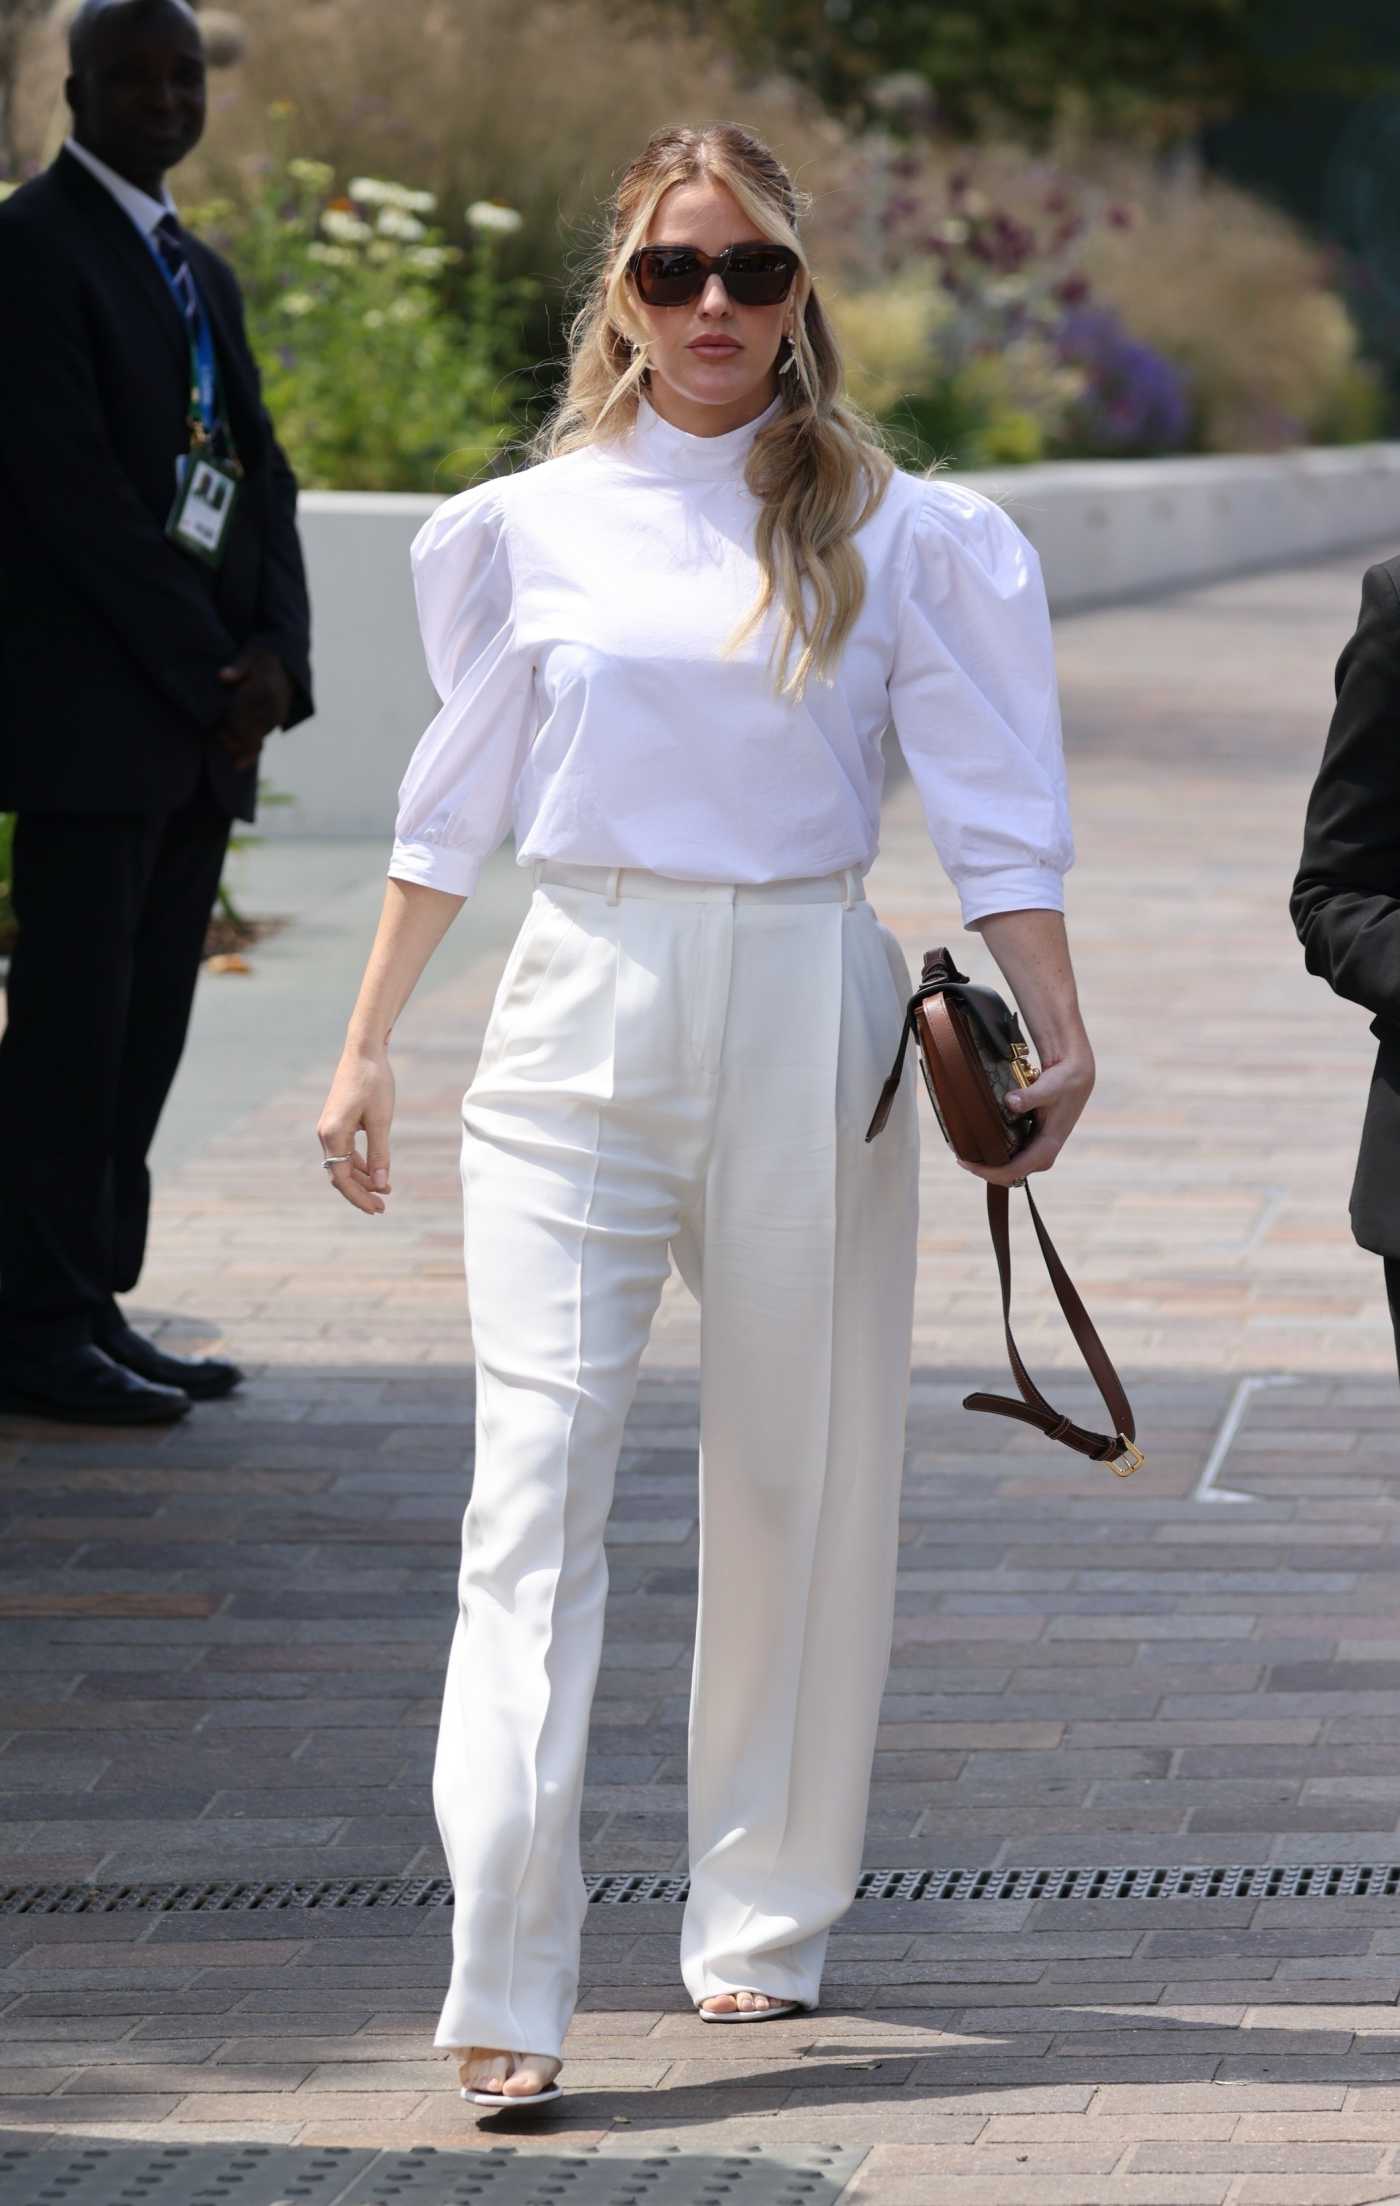 Ellie Goulding in a White Blouse Arrives at the Wimbledon Women's Singles Final at All England Lawn Tennis and Croquet Club in London 07/09/2022